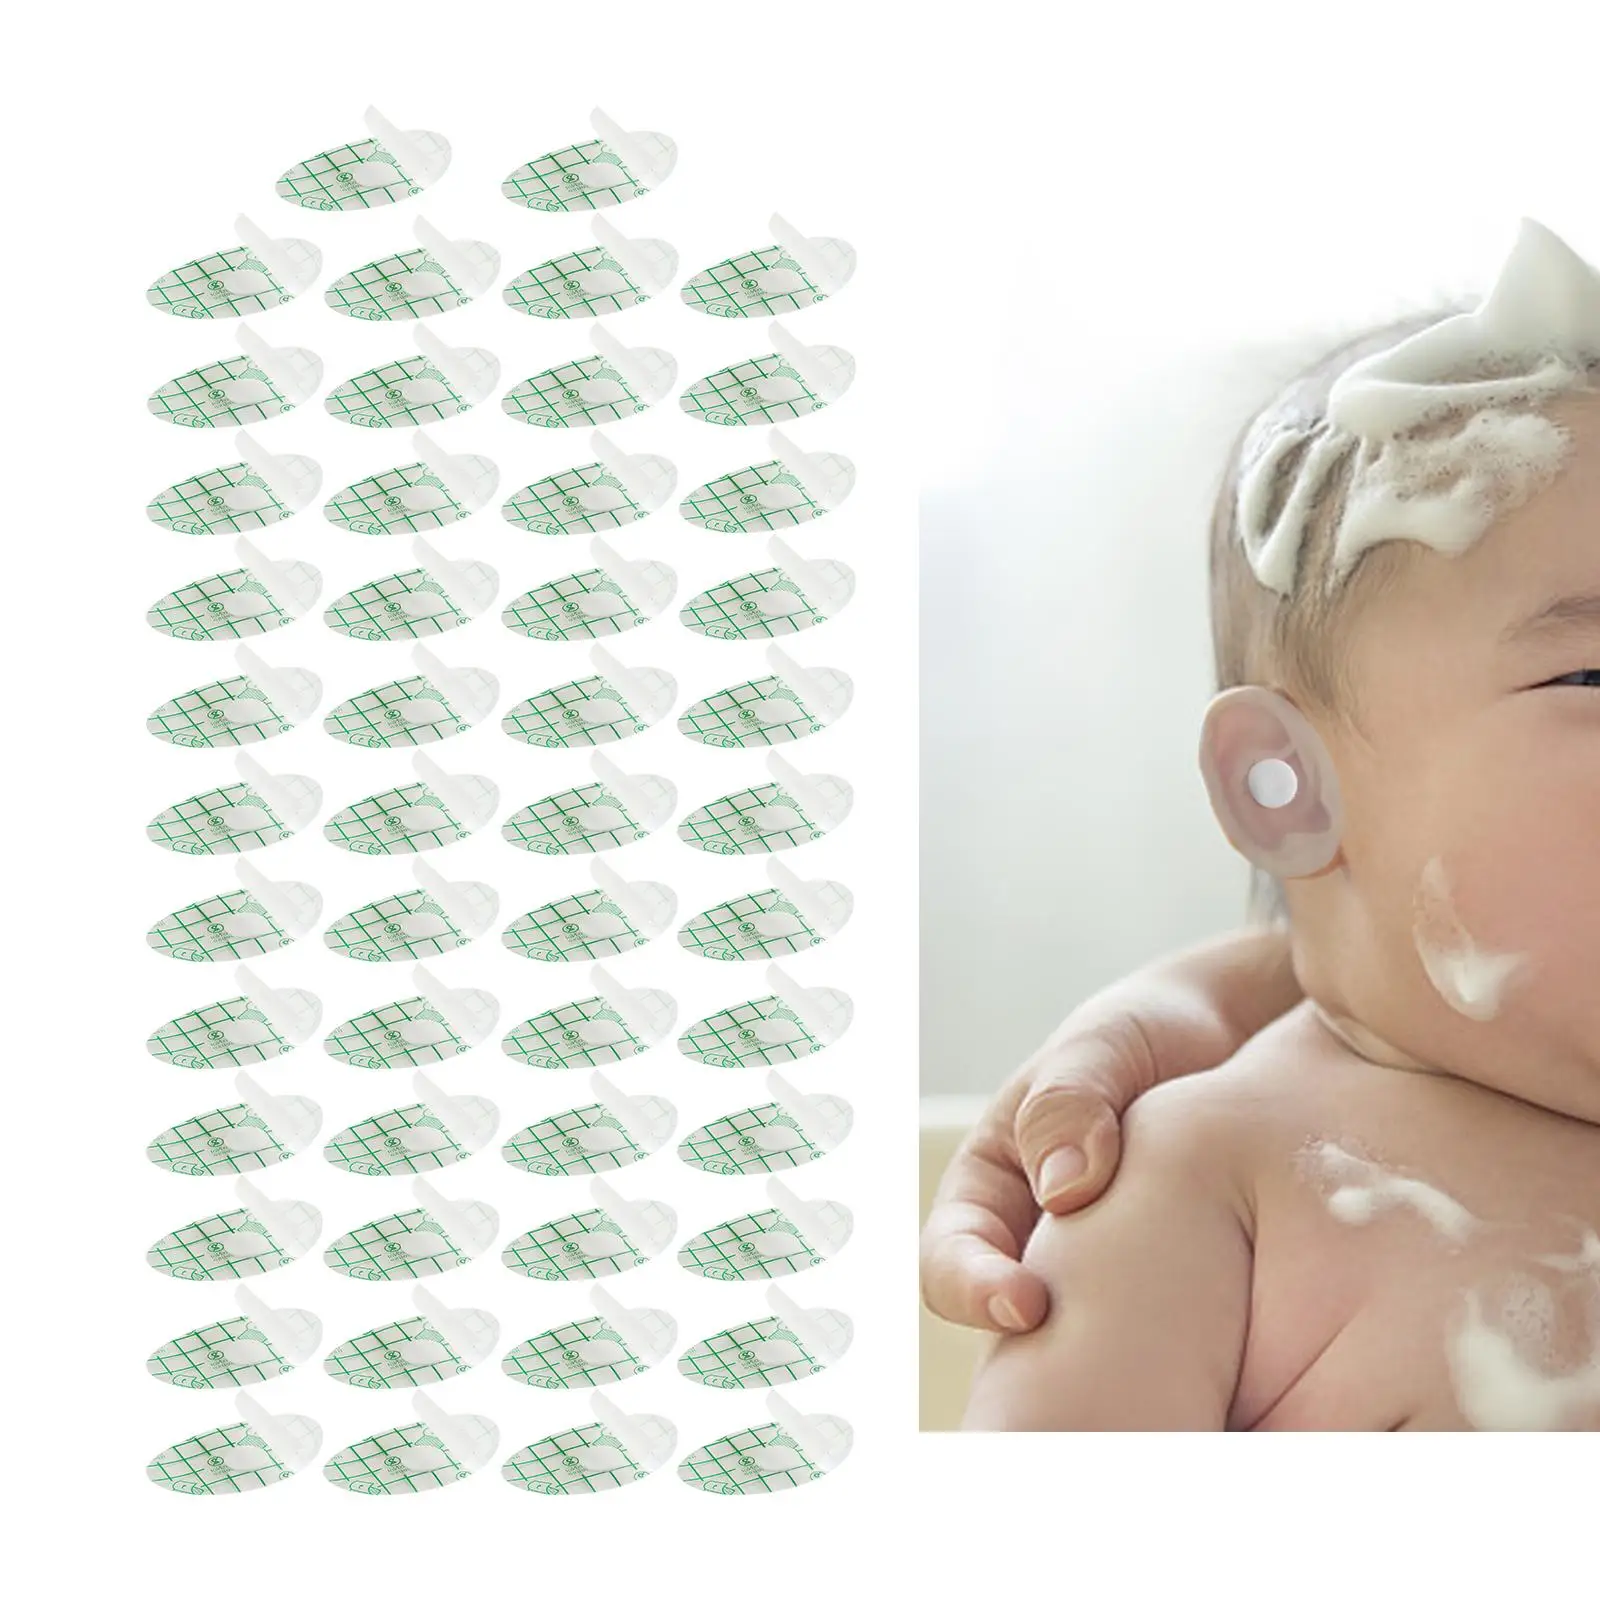 50x Waterproof Baby Ear Stickers Transparent Adhesive Wear Resistant Ears Protector Covers for Surfing Snorkeling Kids Infants